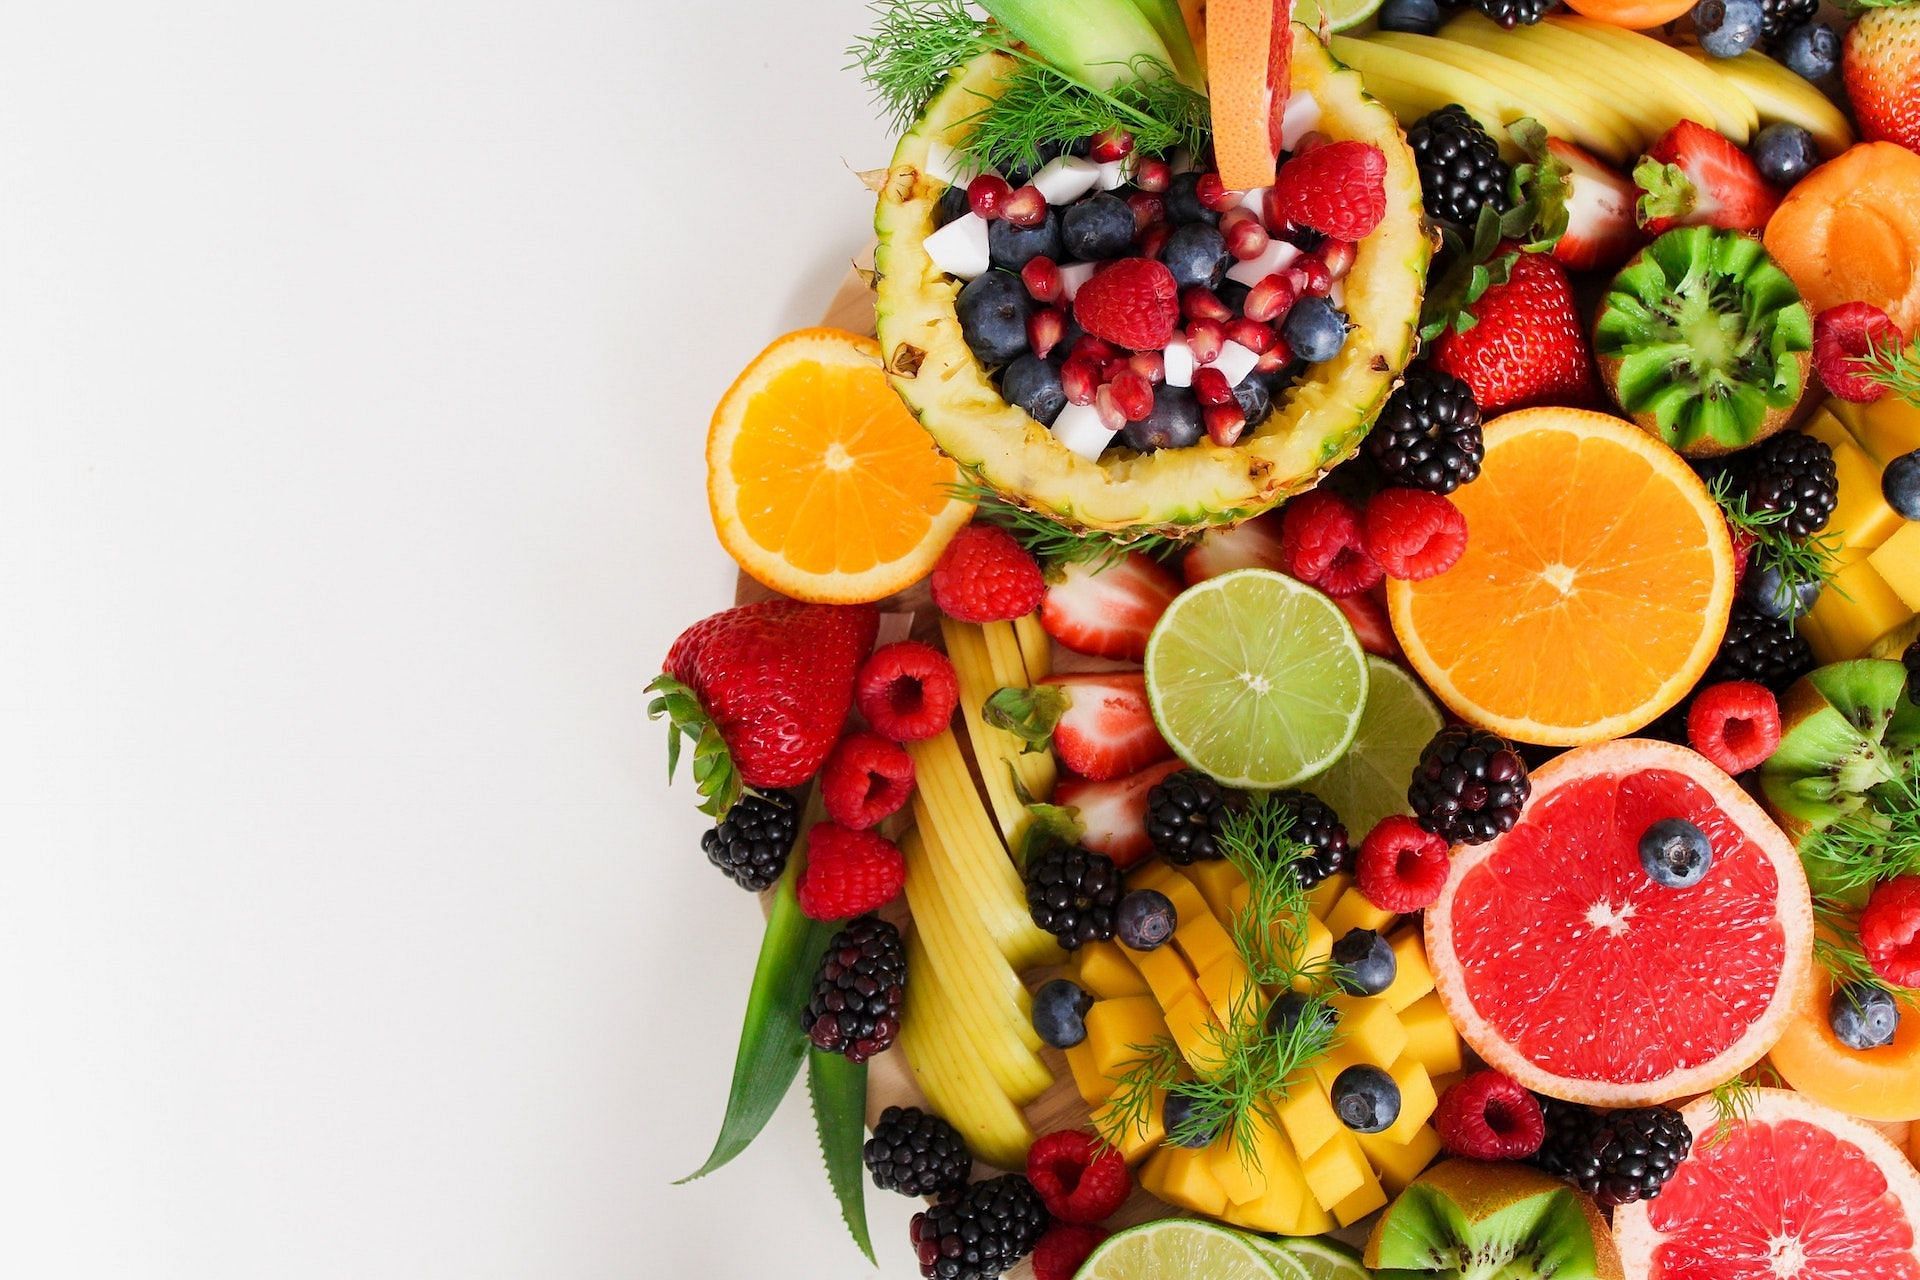 There are certain essential nutrients that are required by woman at every phase. (Photo via Pexels/Jane Doan)